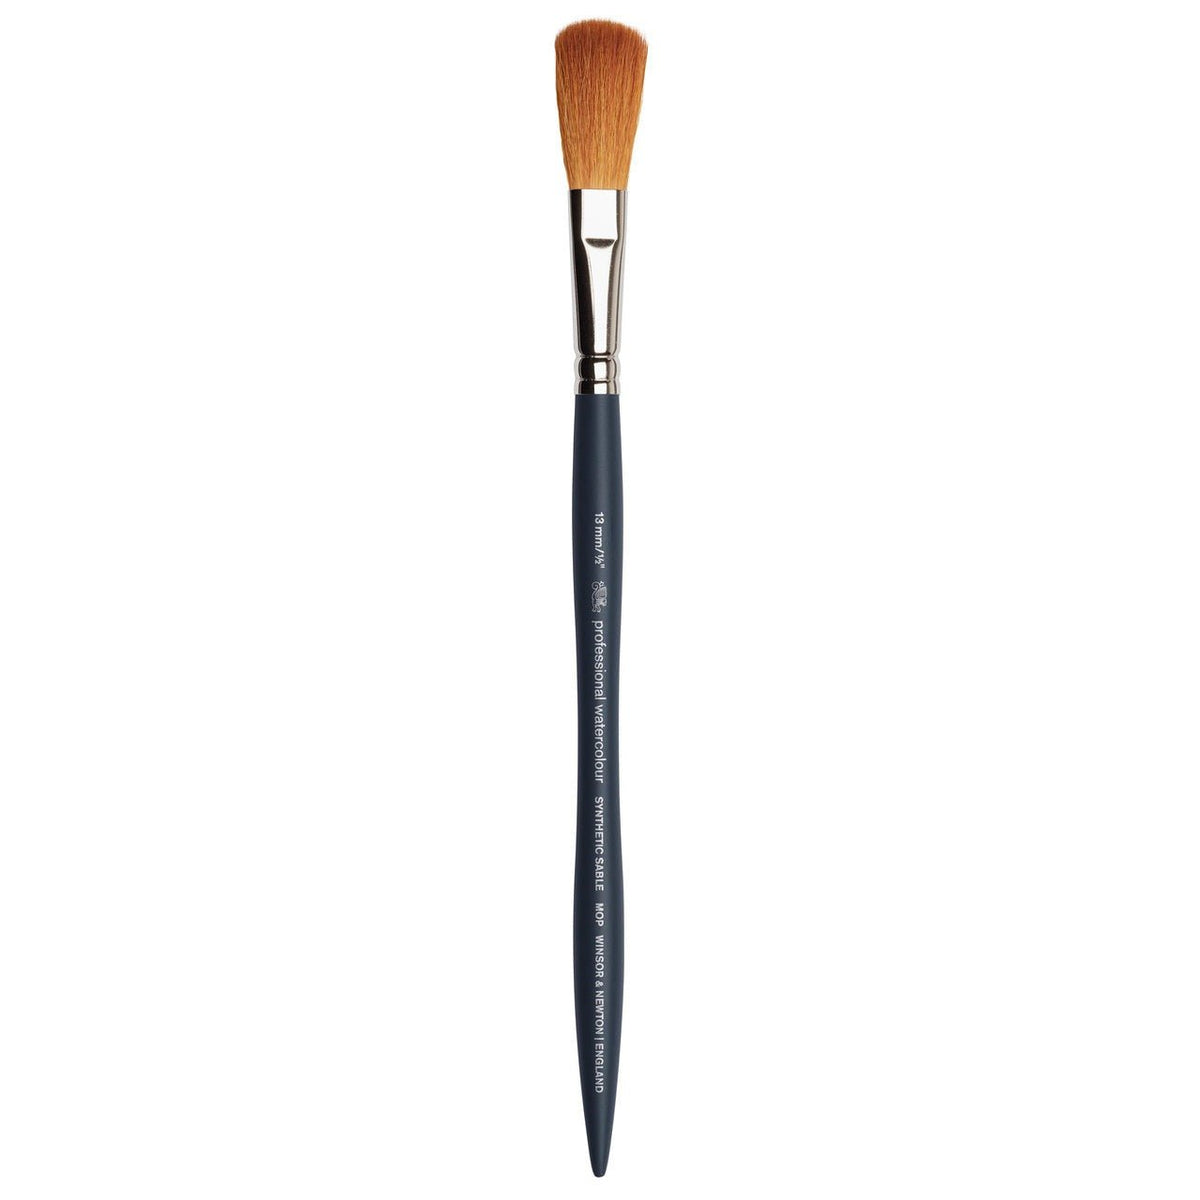 Winsor & Newton Professional Watercolor Synthetic Sable Brush - Mop 1/2 inch - merriartist.com